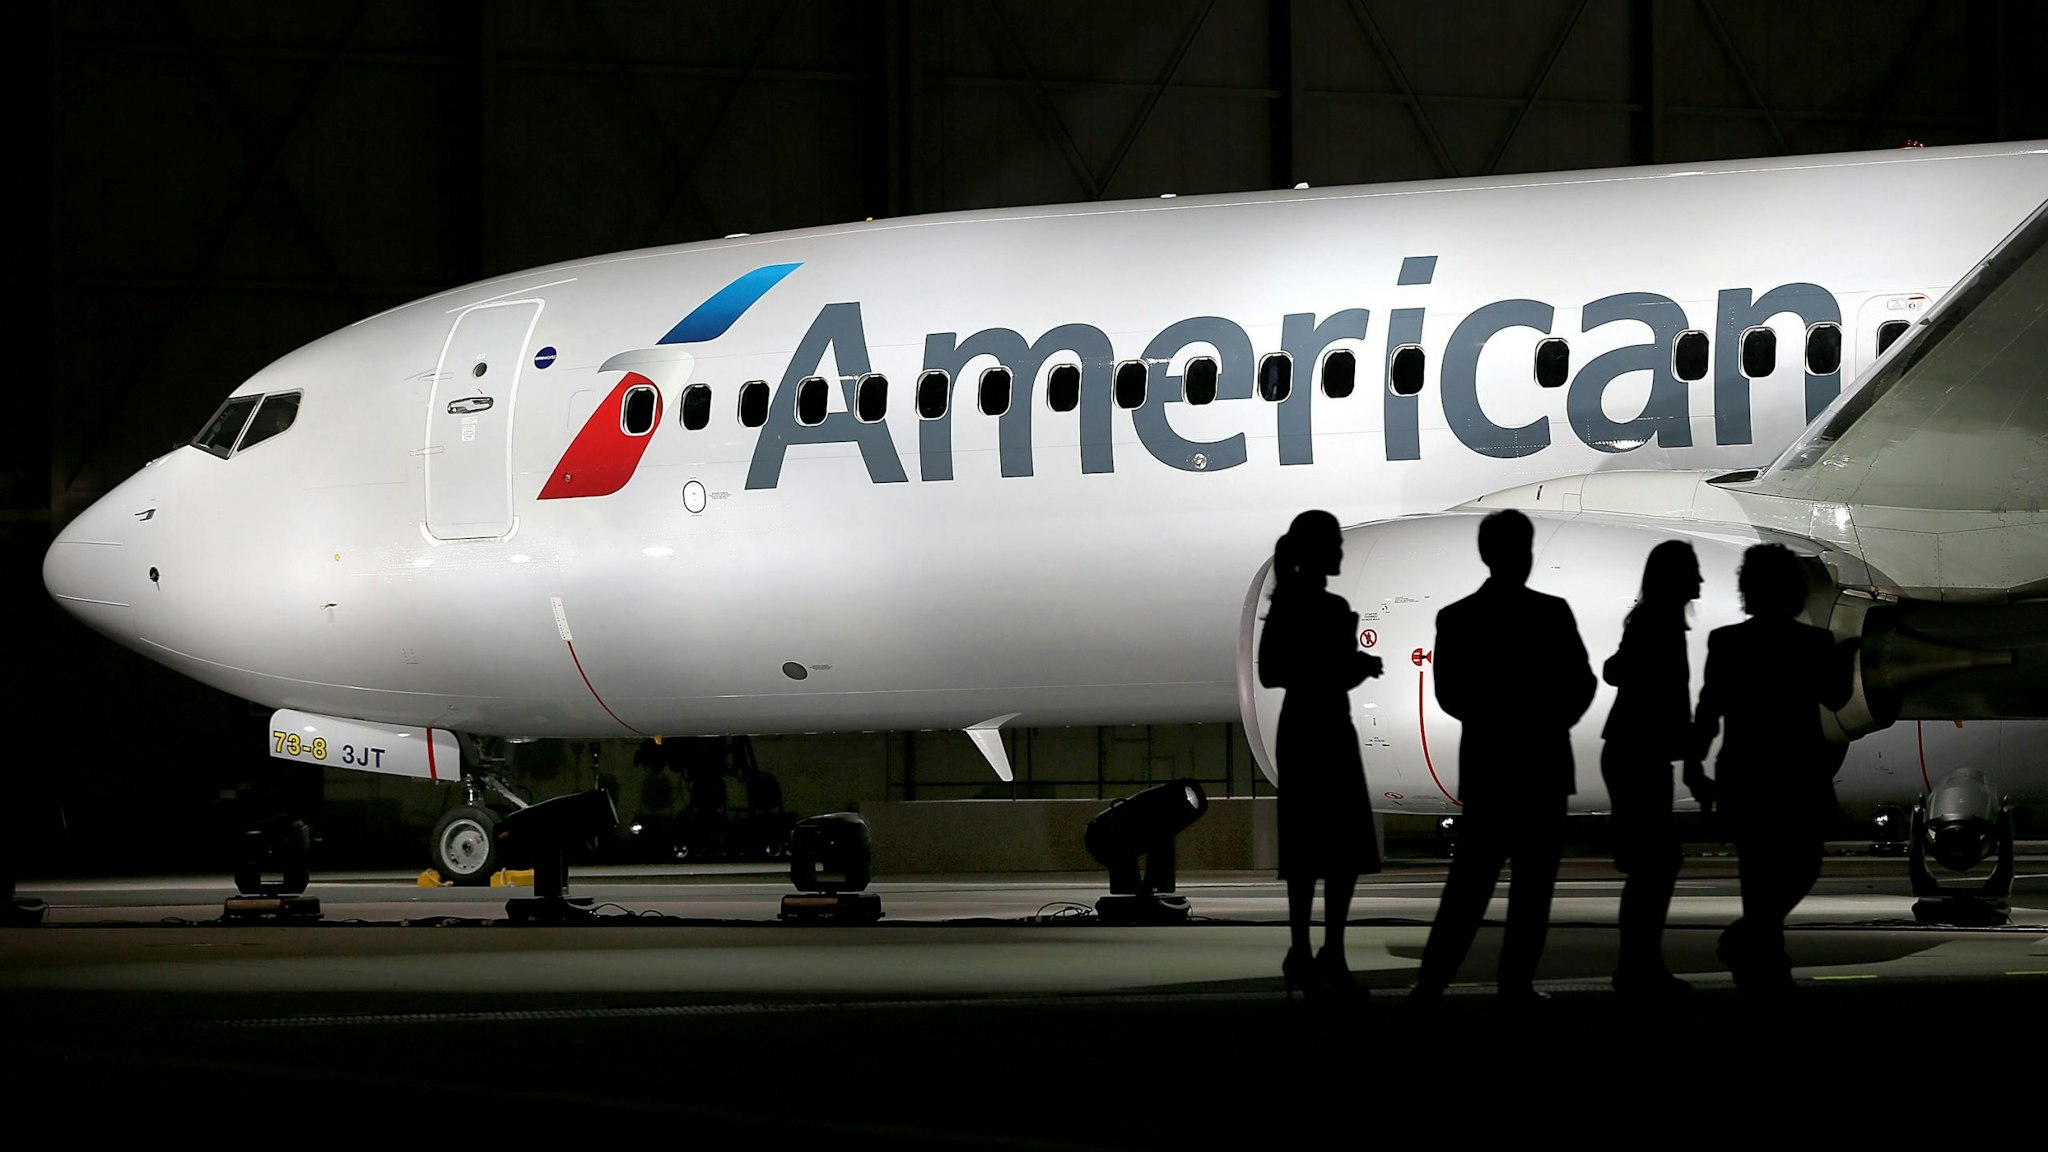 DALLAS, TX - JANUARY 17: American Airlines unveils a new company logo and exterior paint scheme on a Boeing 737-800 aircraft on January 17, 2013 in Dallas, Texas. The exterior changes are the first for the company since 1968 and were announced as the parent company of American Airlines, AMR, is considering a merger with US Airways.